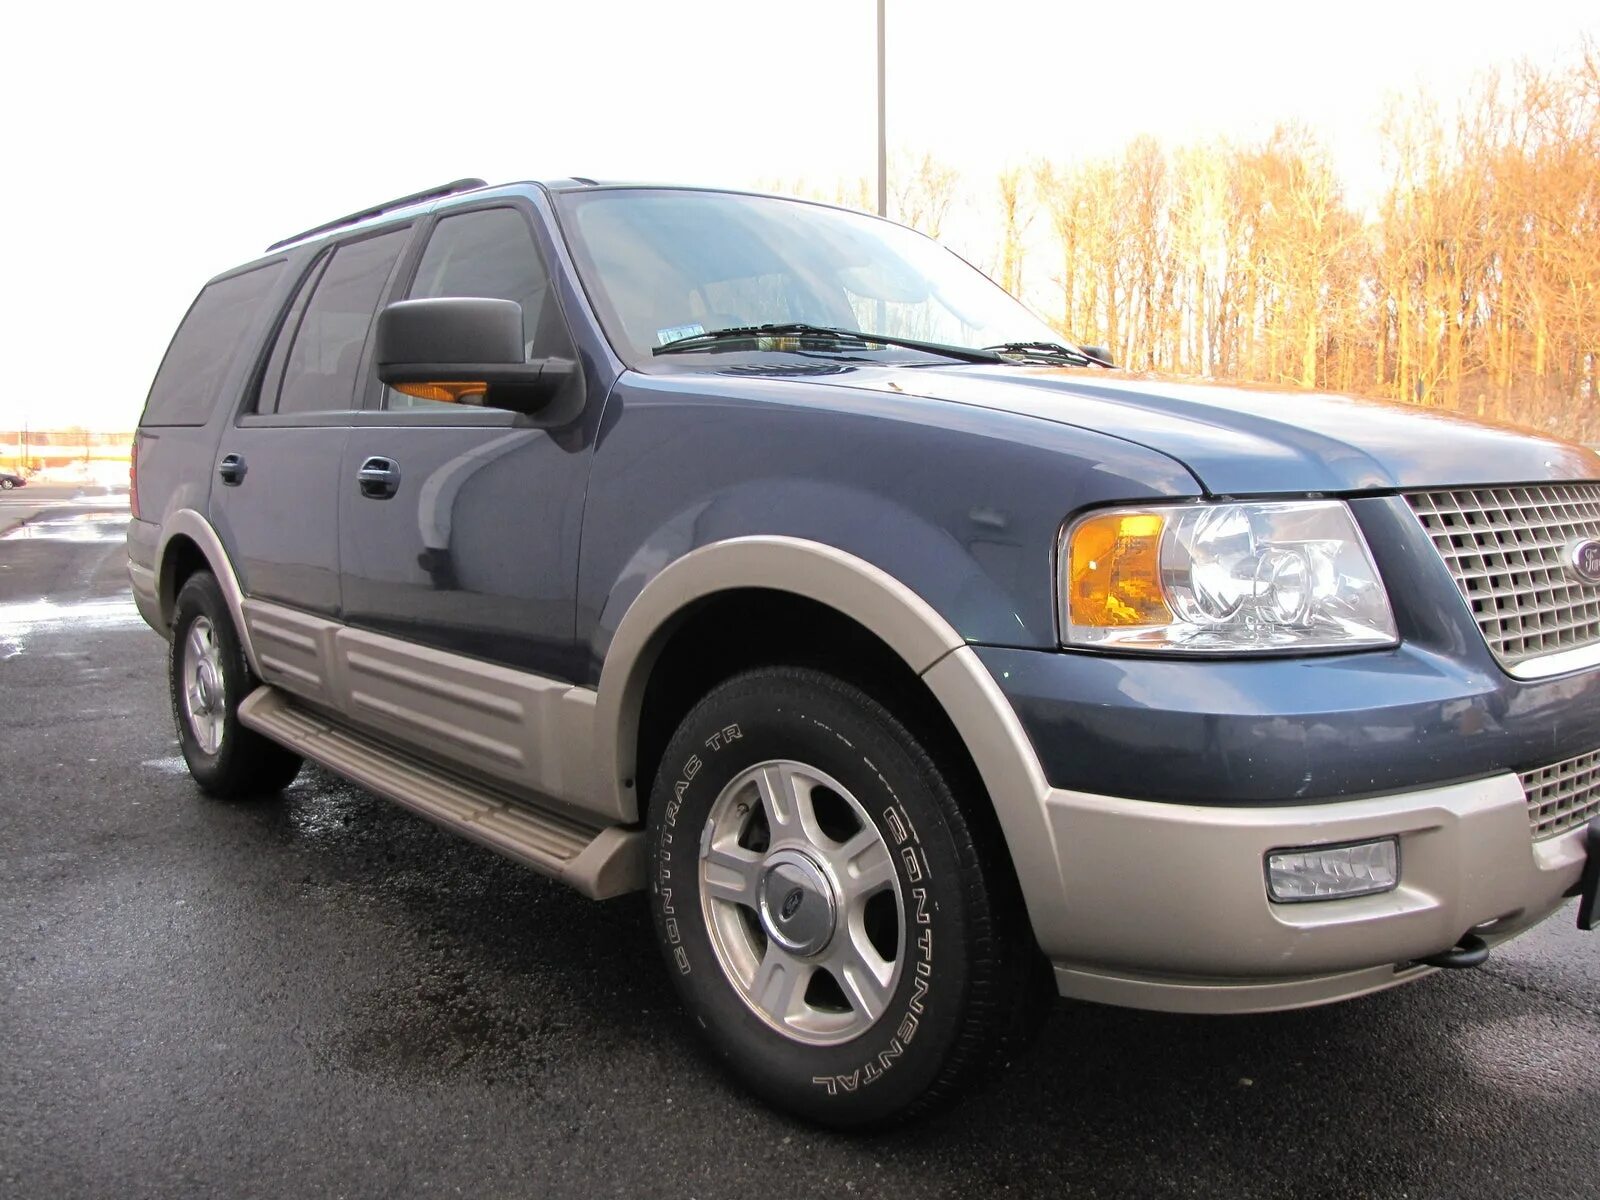 Форд 2005 г. Ford Expedition 2005. Ford Expedition 1. Ford Expedition 2001. Форд Экспедишн 2005г.